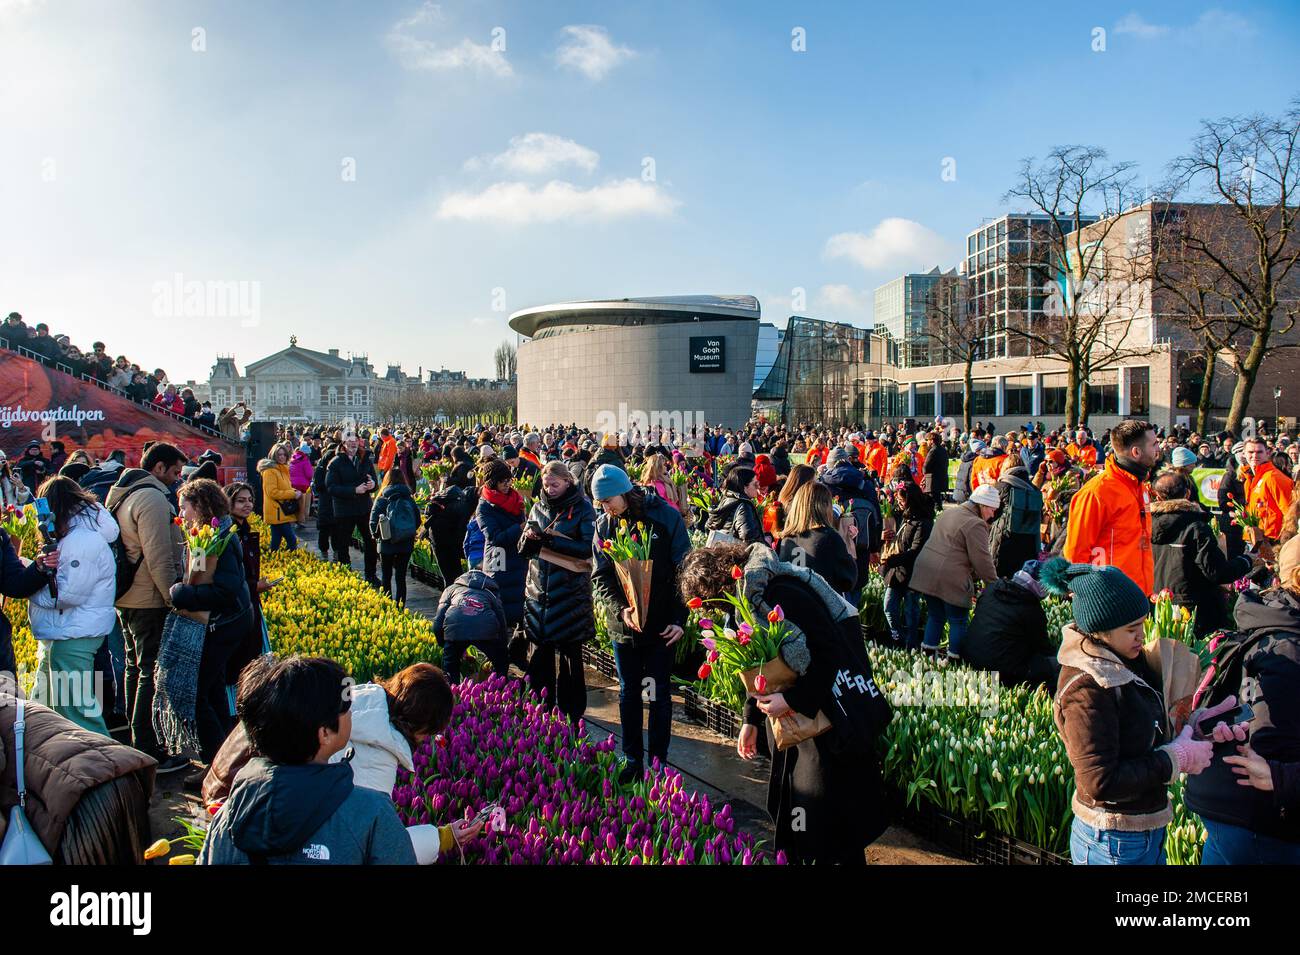 People are seen taking bunches of tulips for free. Each year on the 3rd Saturday of January, the National Tulip Day is celebrated in Amsterdam. Dutch tulip growers built a huge picking garden with more than 200,000 colorful tulips at the Museumplein in Amsterdam. Visitors are allowed to pick tulips for free. The event was opened by Olympic skating champion, Irene Schouten. Prior to the opening, she christened a new tulip: Tulipa 'Dutch Pearl' as a reference to the world - famous painting 'The girl with a pearl earring' by Johannes Vermeer. Stock Photo